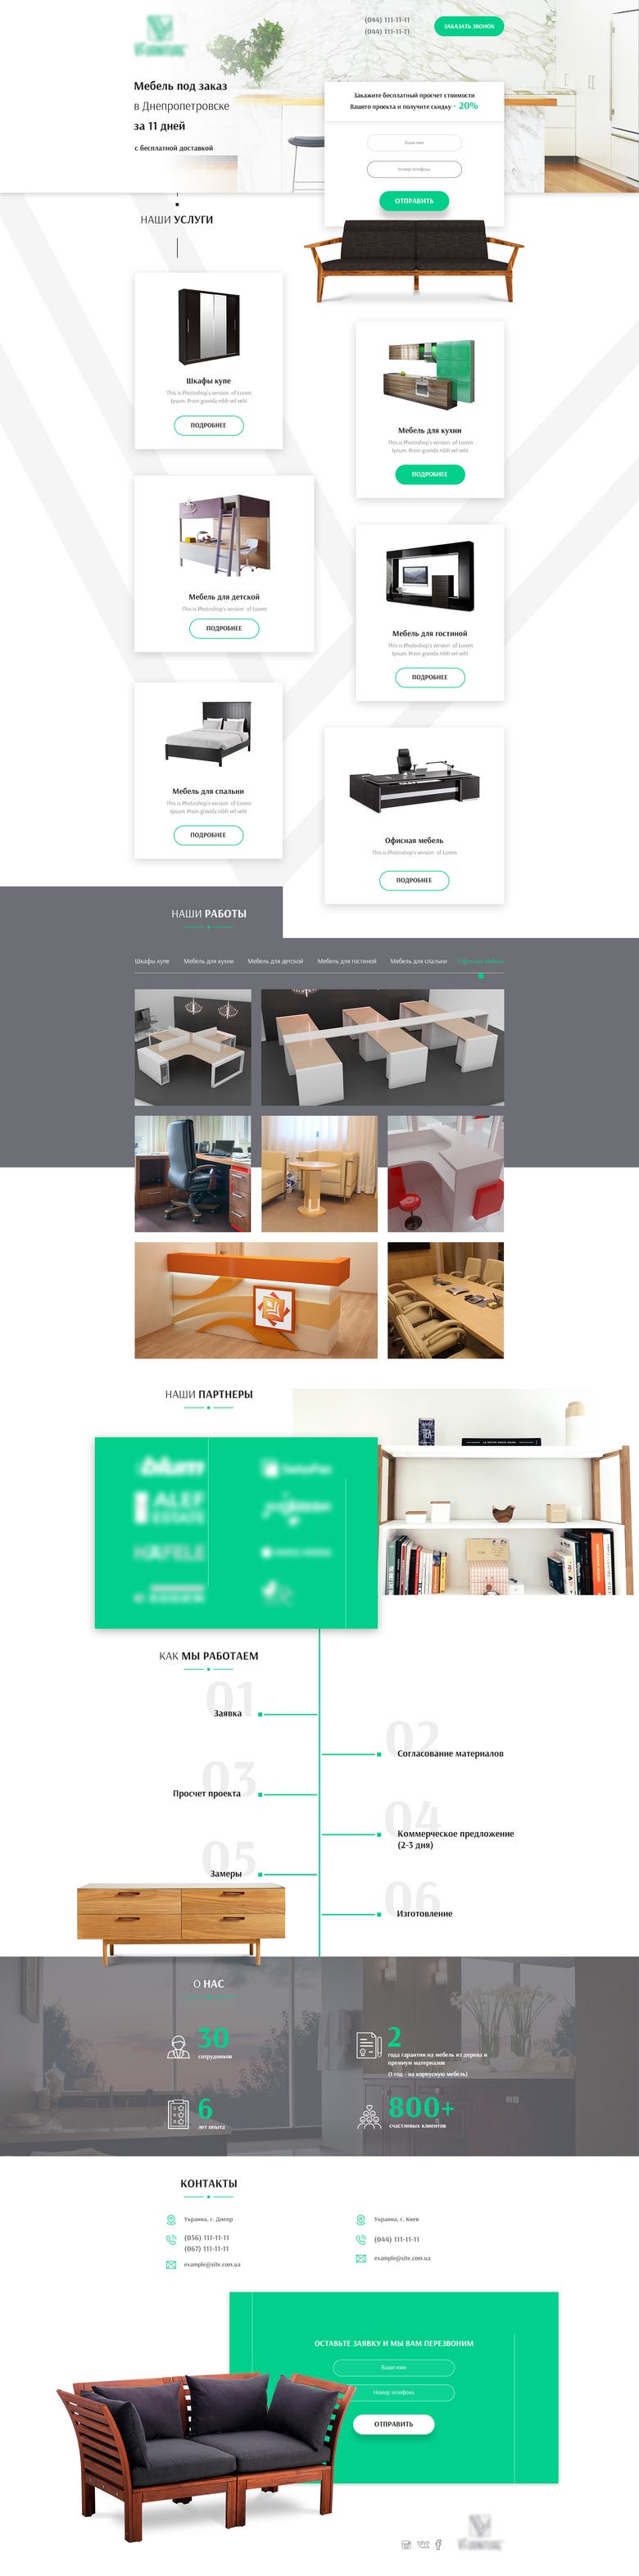 Landing page for furniture company